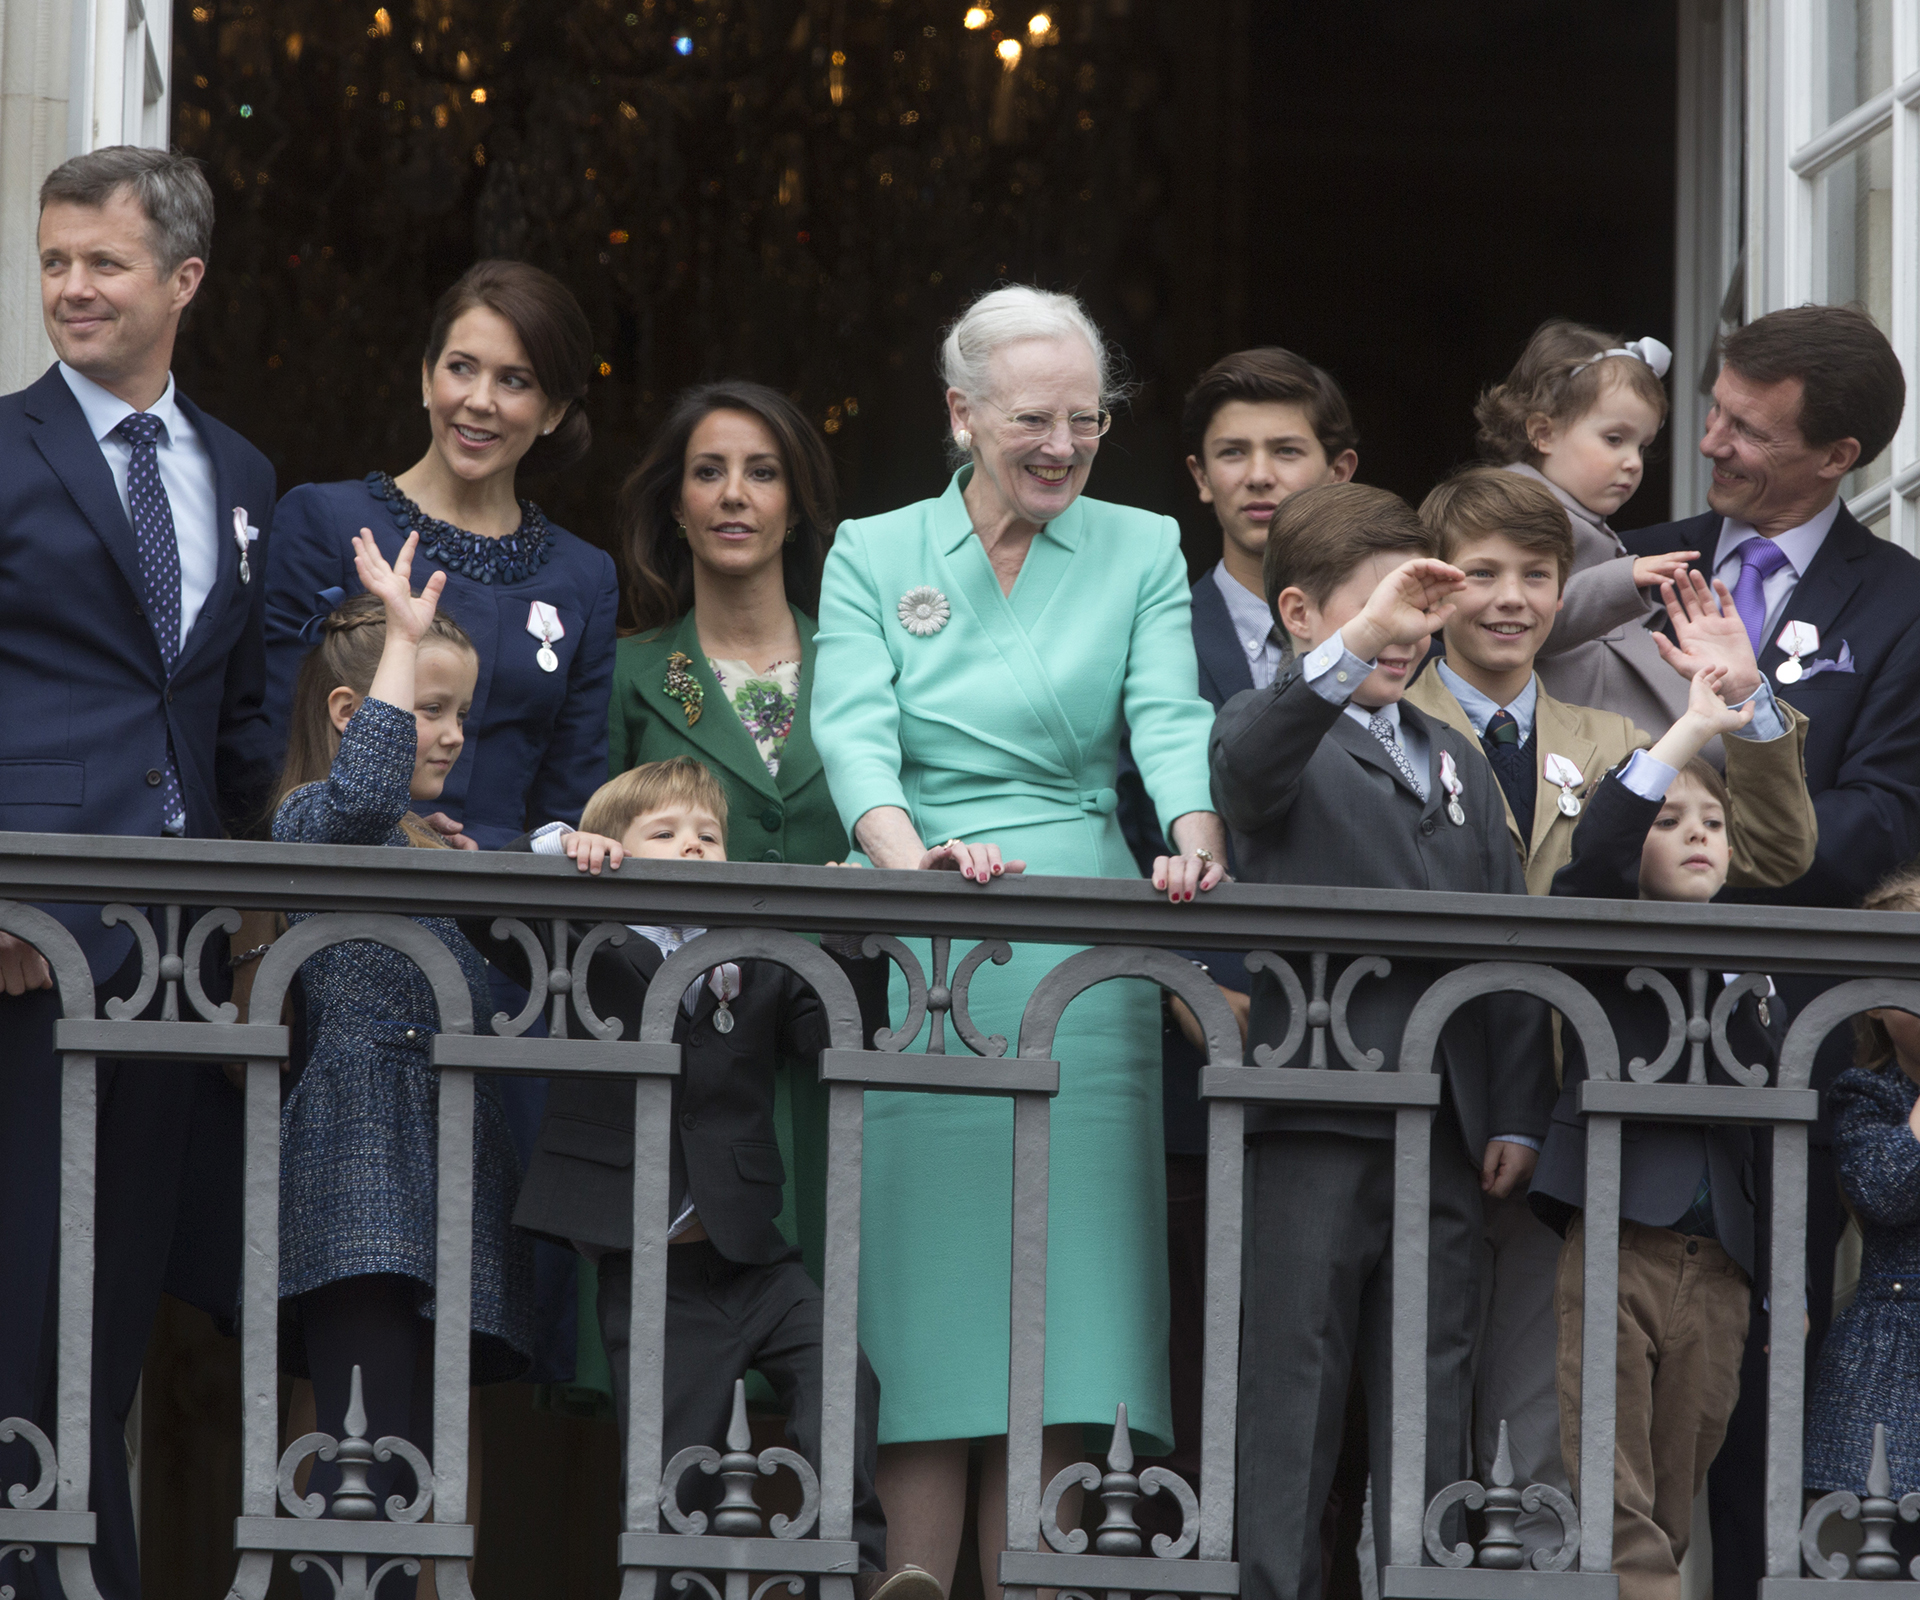 Royals come together to celebrate Queen Margrethe’s birthday. Again.